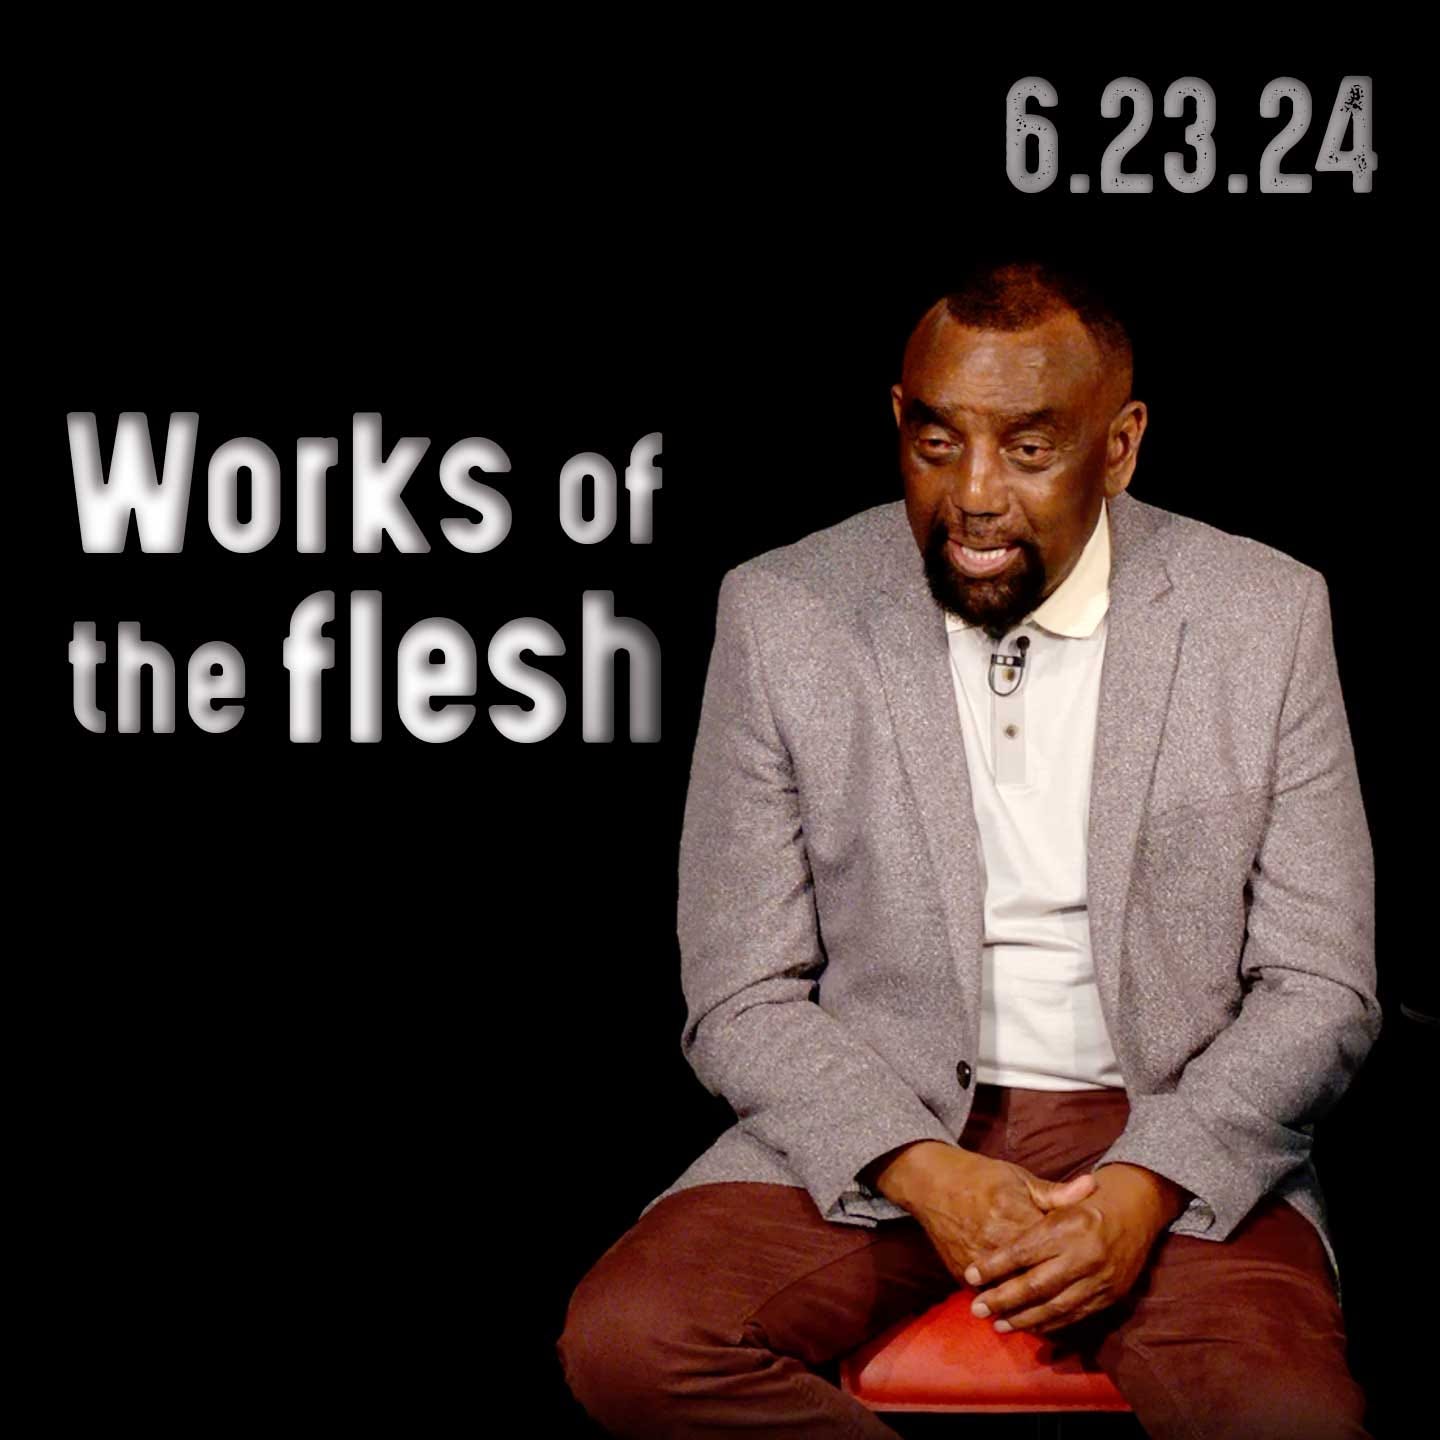 Why do you carry out the works of the flesh? | Church 6/23/24